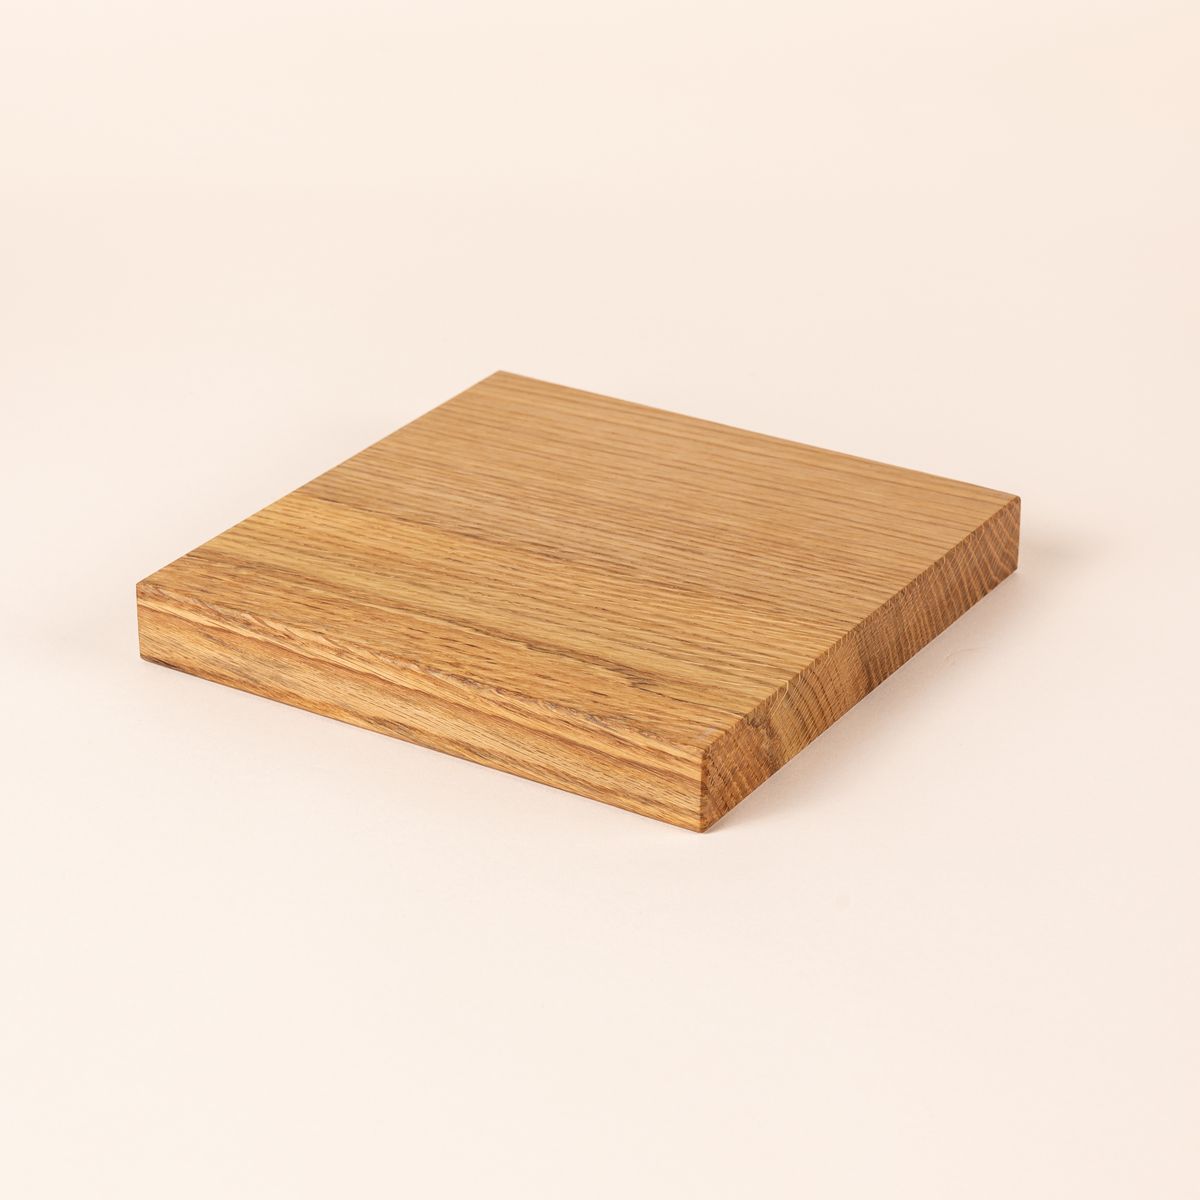 A thick rectangular cutting board made of light-colored wood